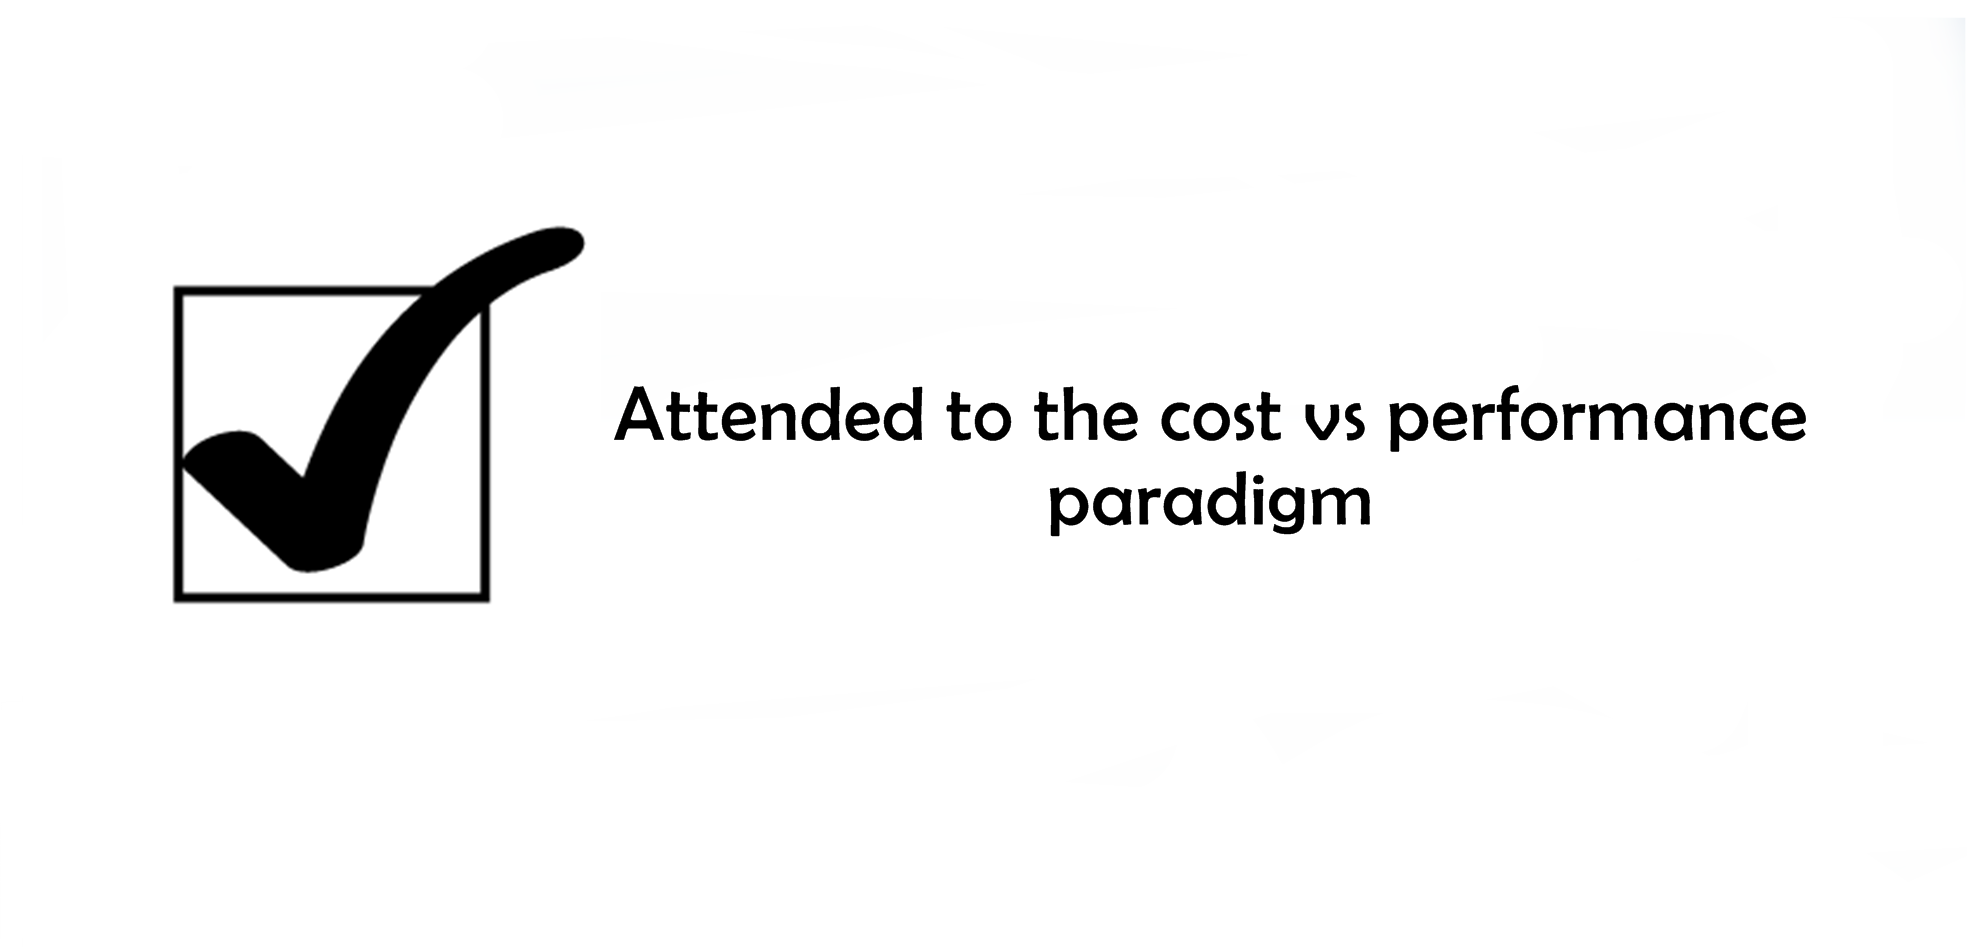 attended to the cost vs performance paradigm